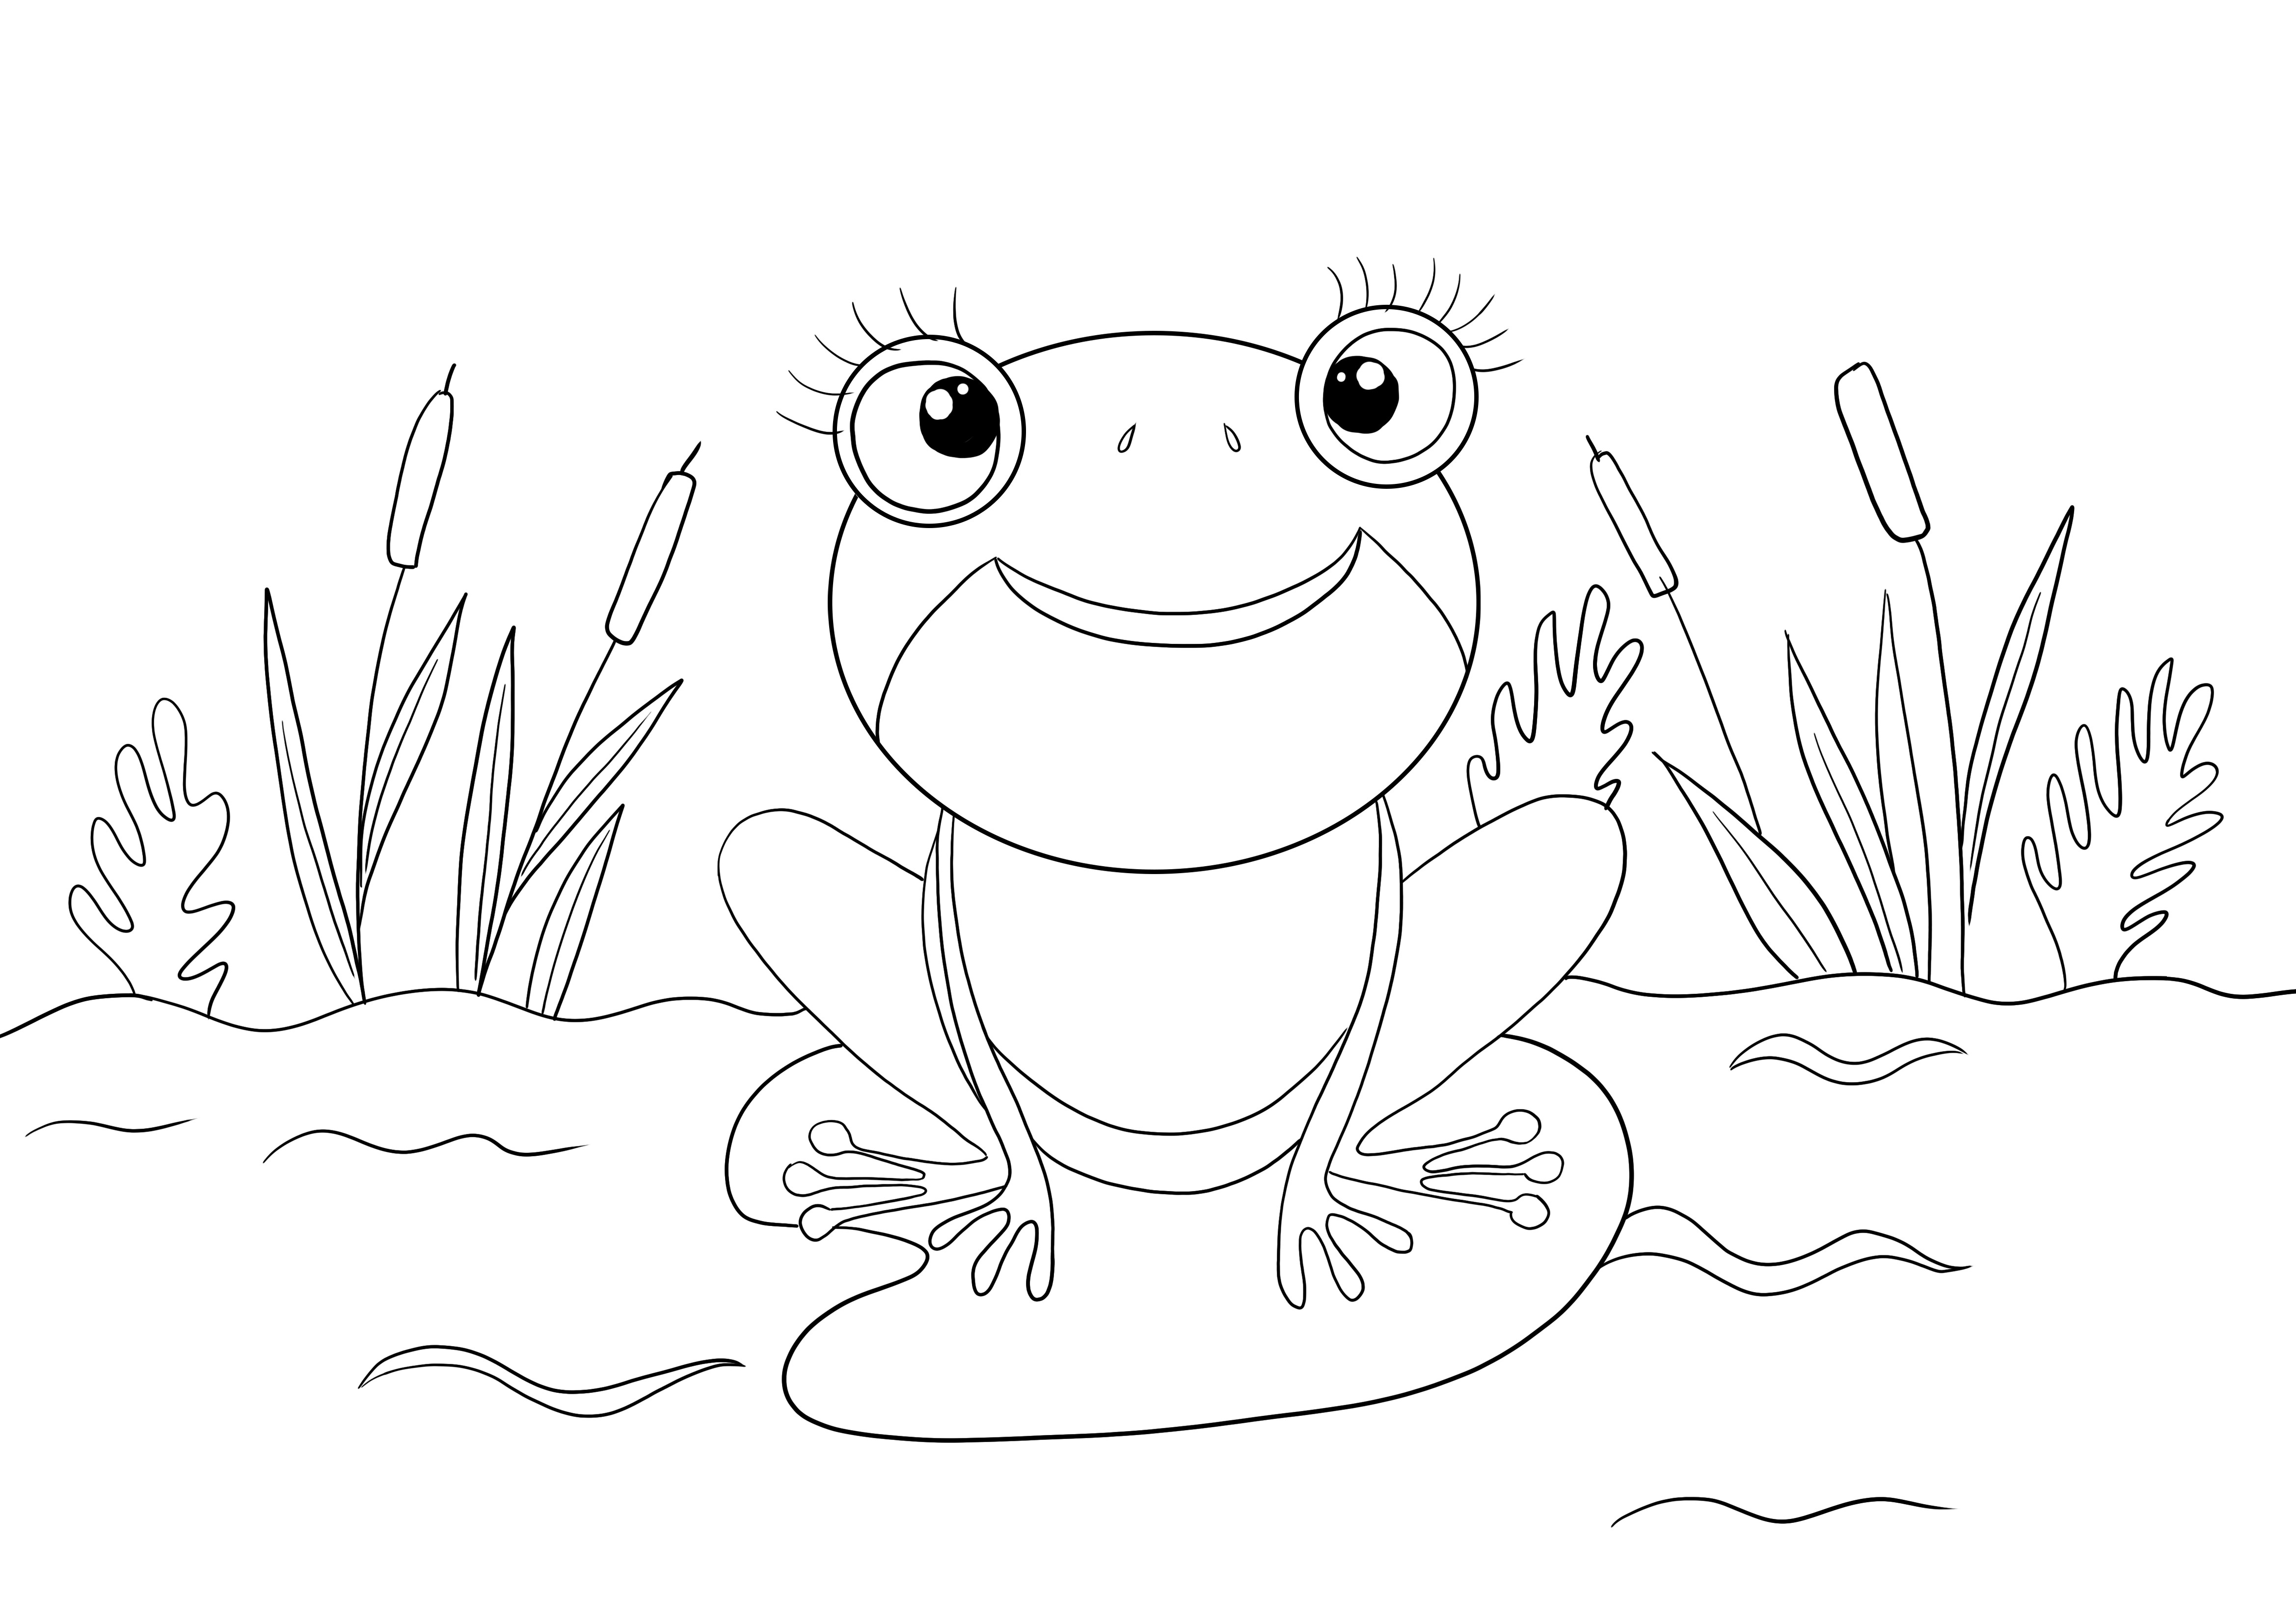 Cute frog free coloring and printing